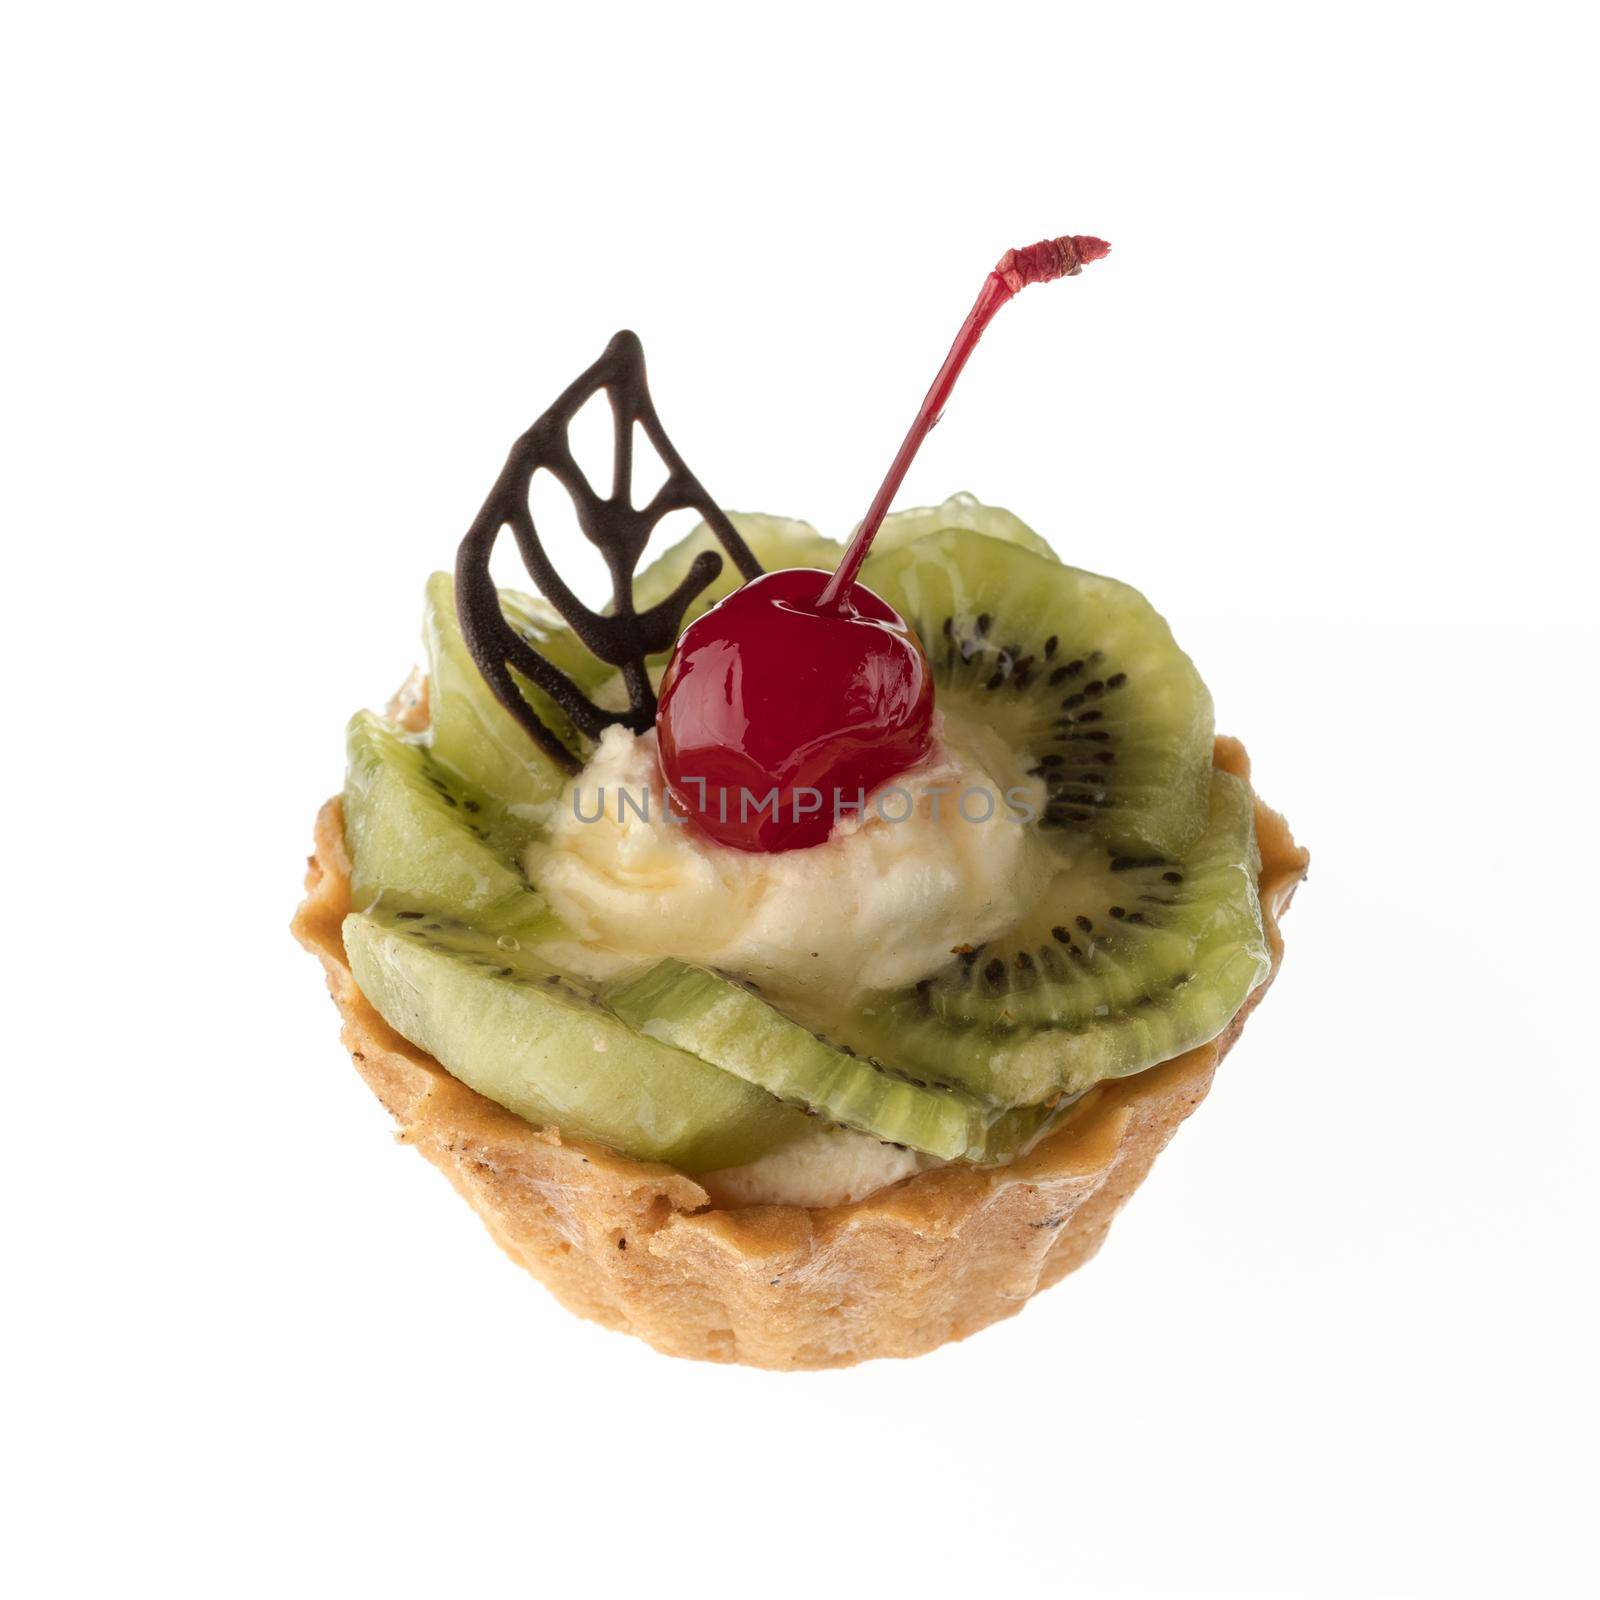 Dessert, cake with kiwi and cherries on a white plate isolated